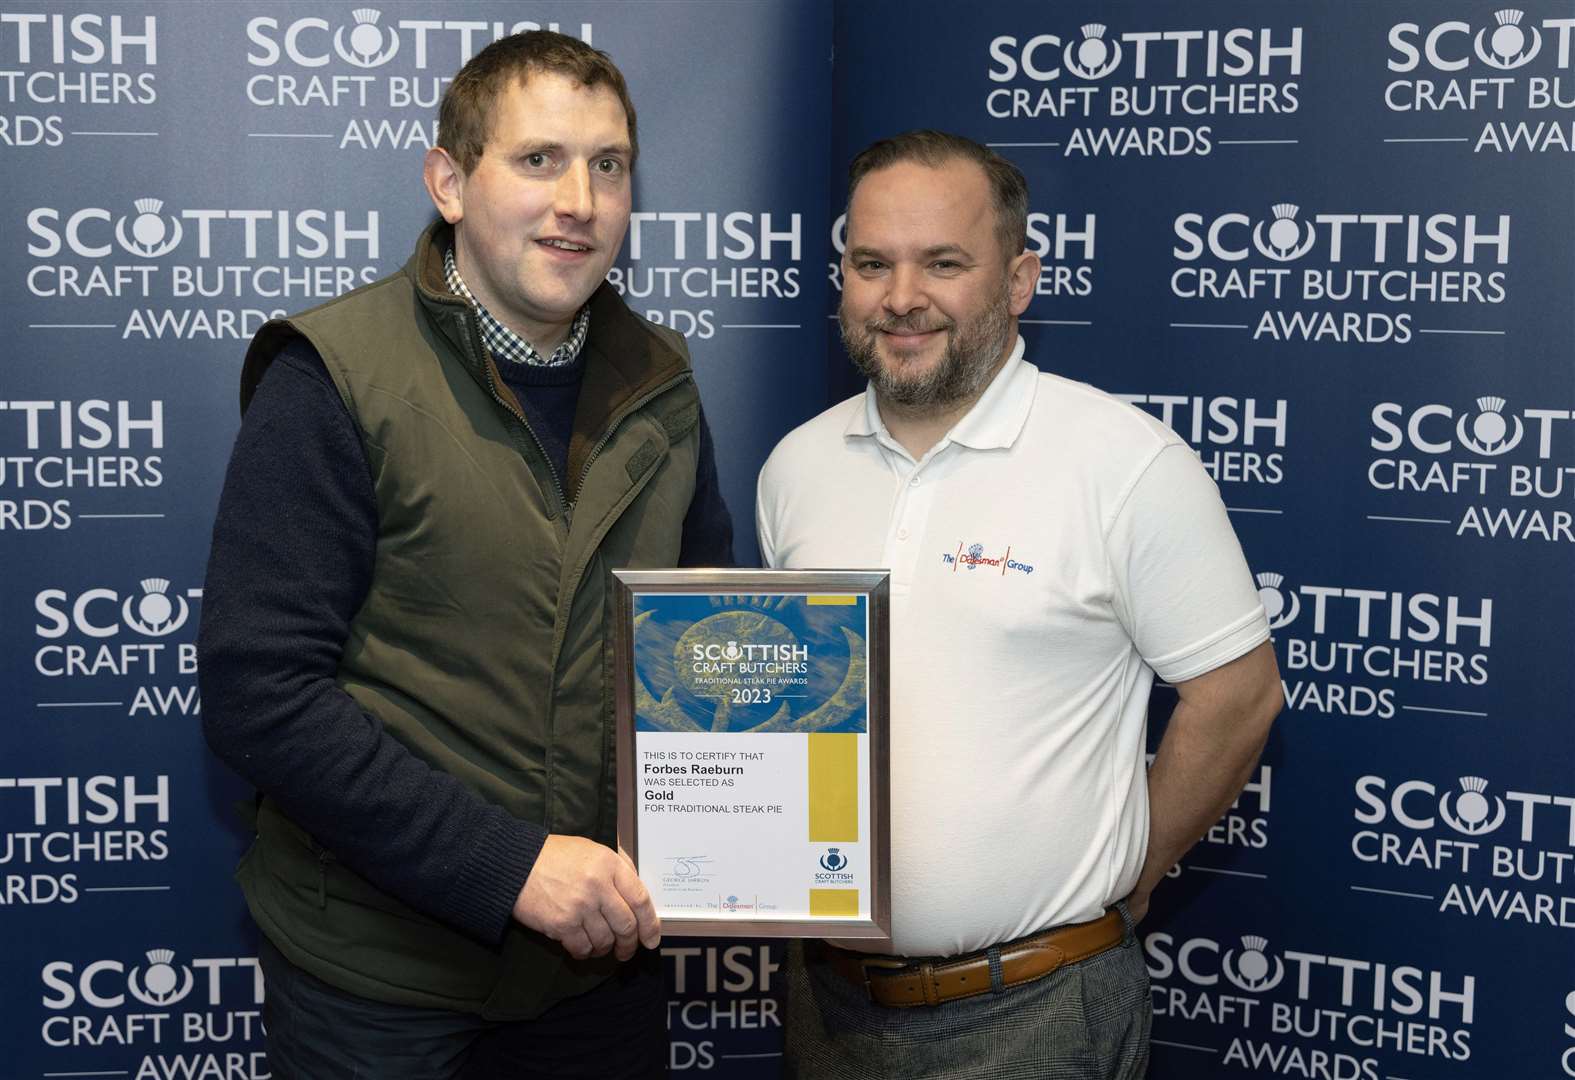 Gary Raeburn (left), from Forbes Raeburn Butchers, pictured with his Gold Award in the Traditional Steak Pie Awards with Simon Coles from sponsors Dalesman. Picture: Graeme Hart.